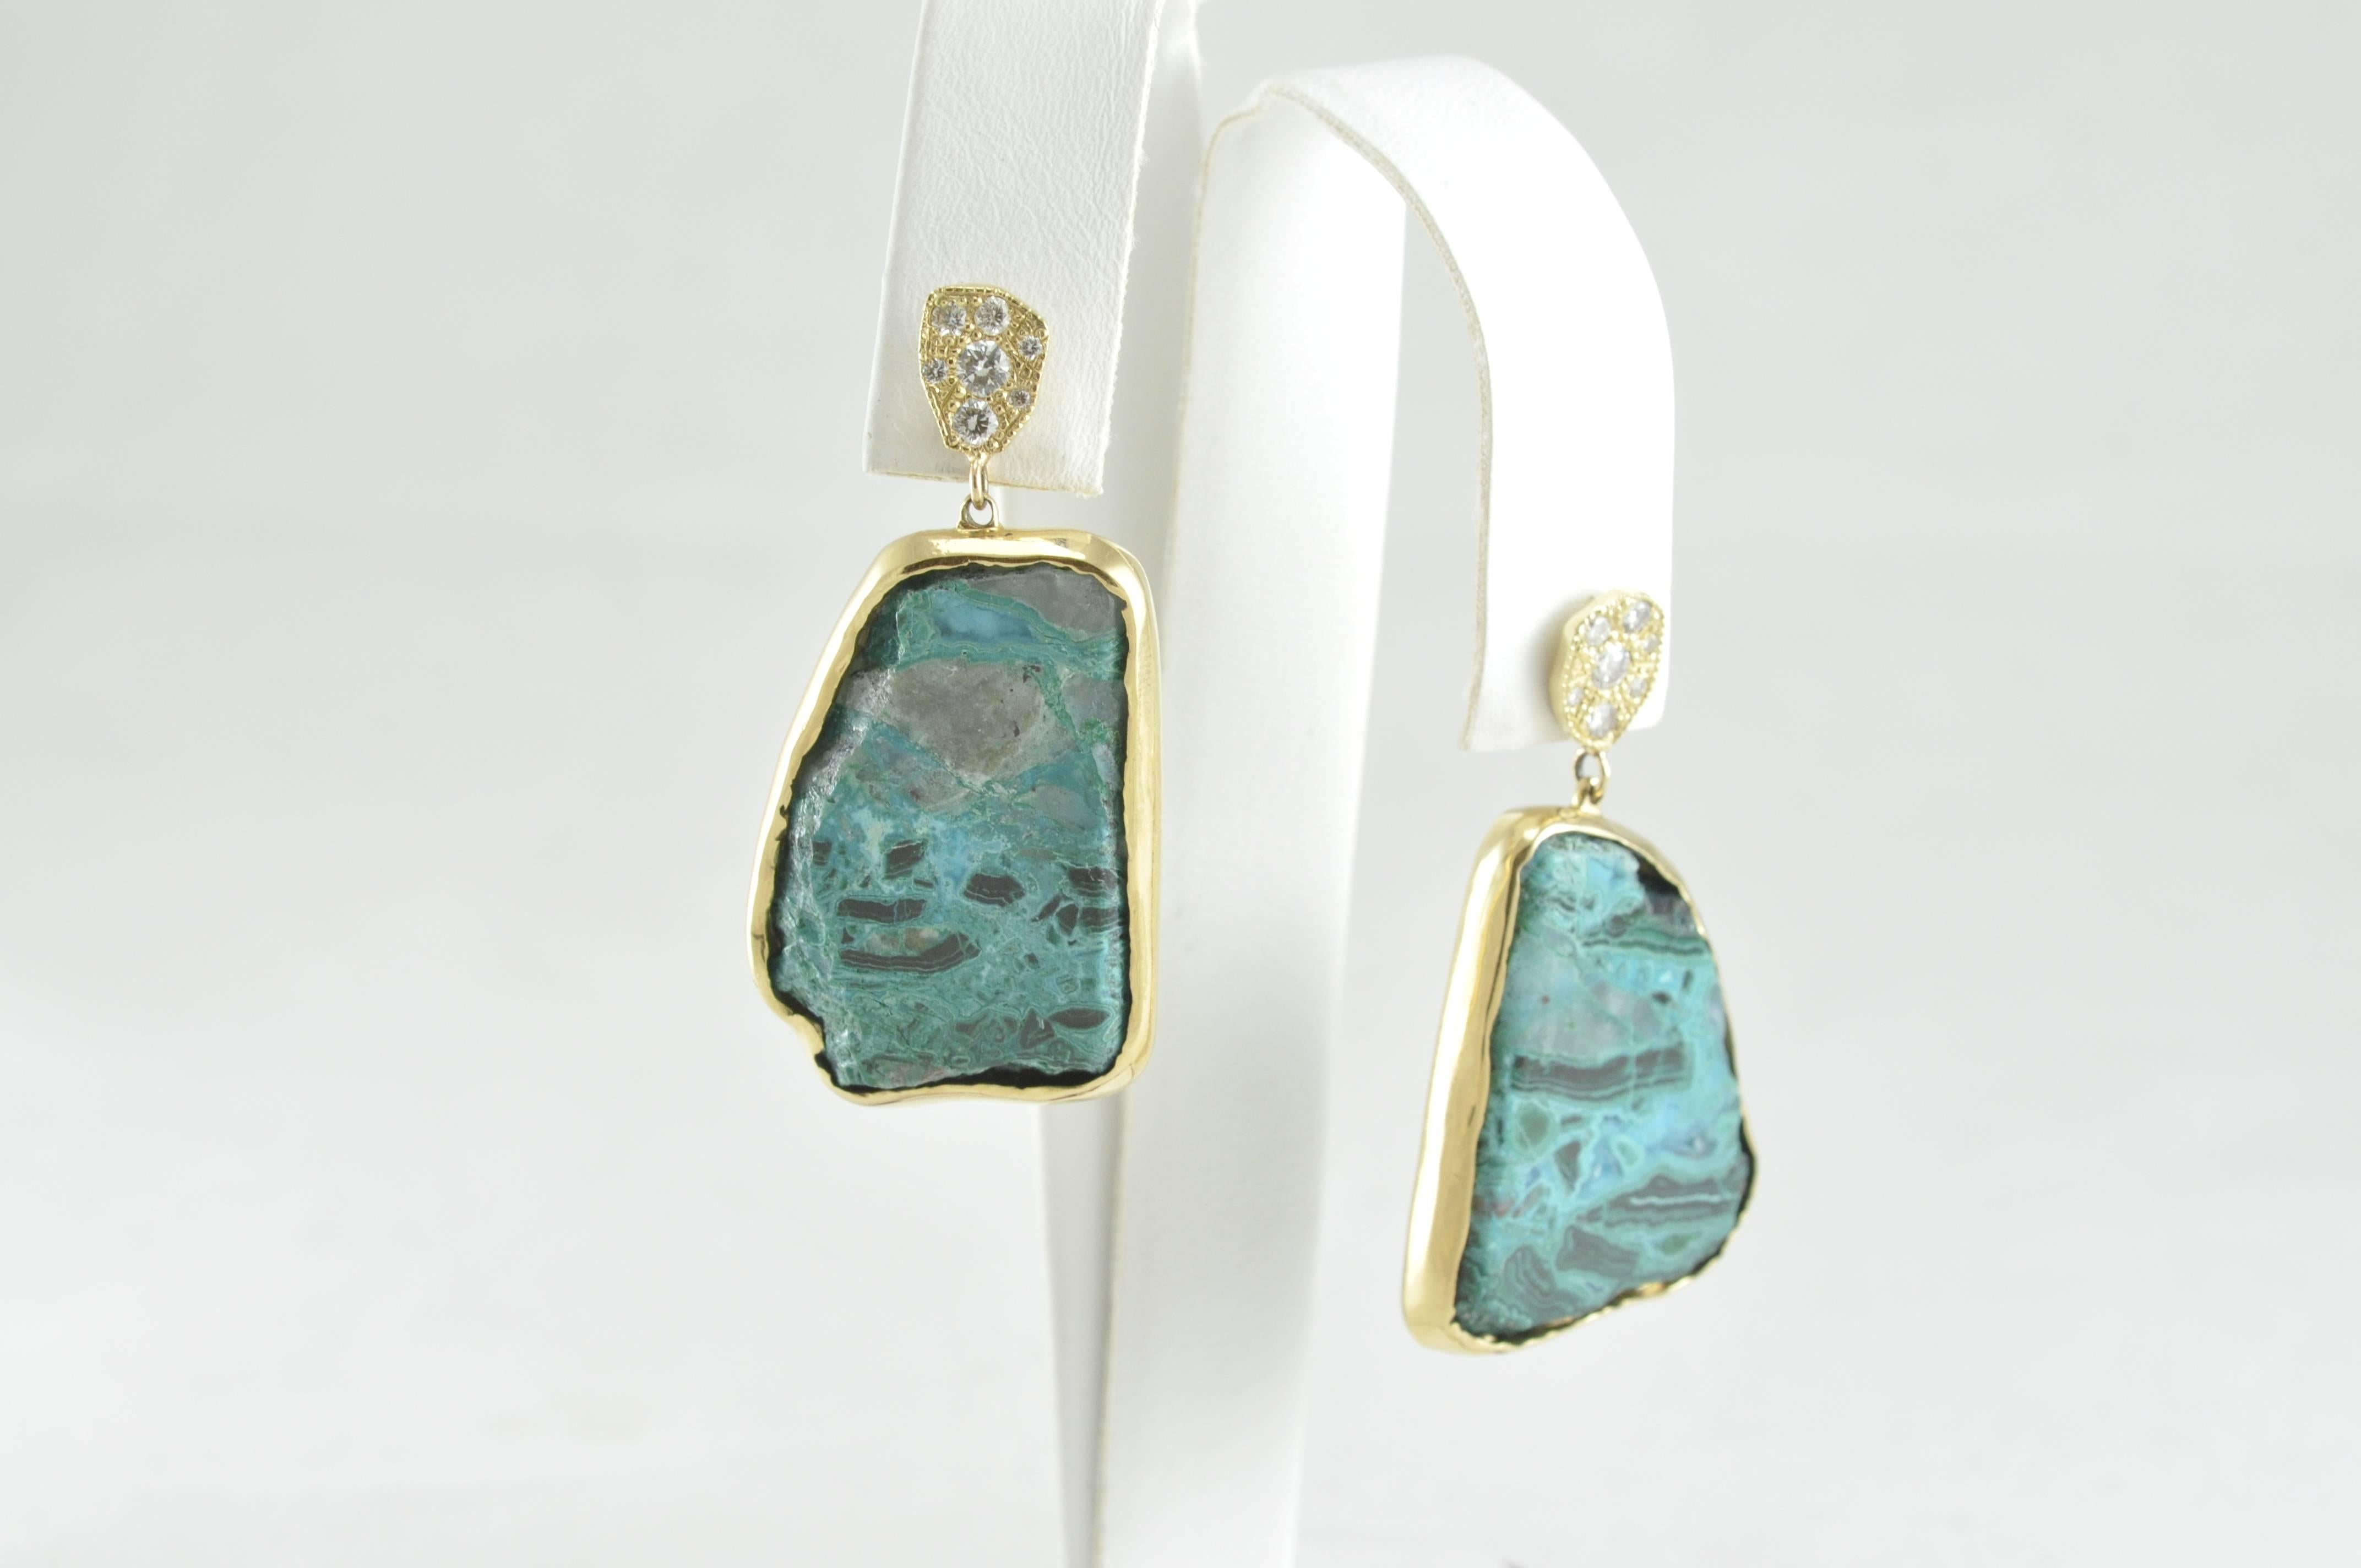 One of a Kind! The asymmetrical shape of the bright blue stones adds to the appeal and intrigue of these phenomenal hand made earrings. 

18K Yellow Gold, Chrysocolla and Diamond Earrings from hot new designer: Rocky Gem Designs. This amazing set of